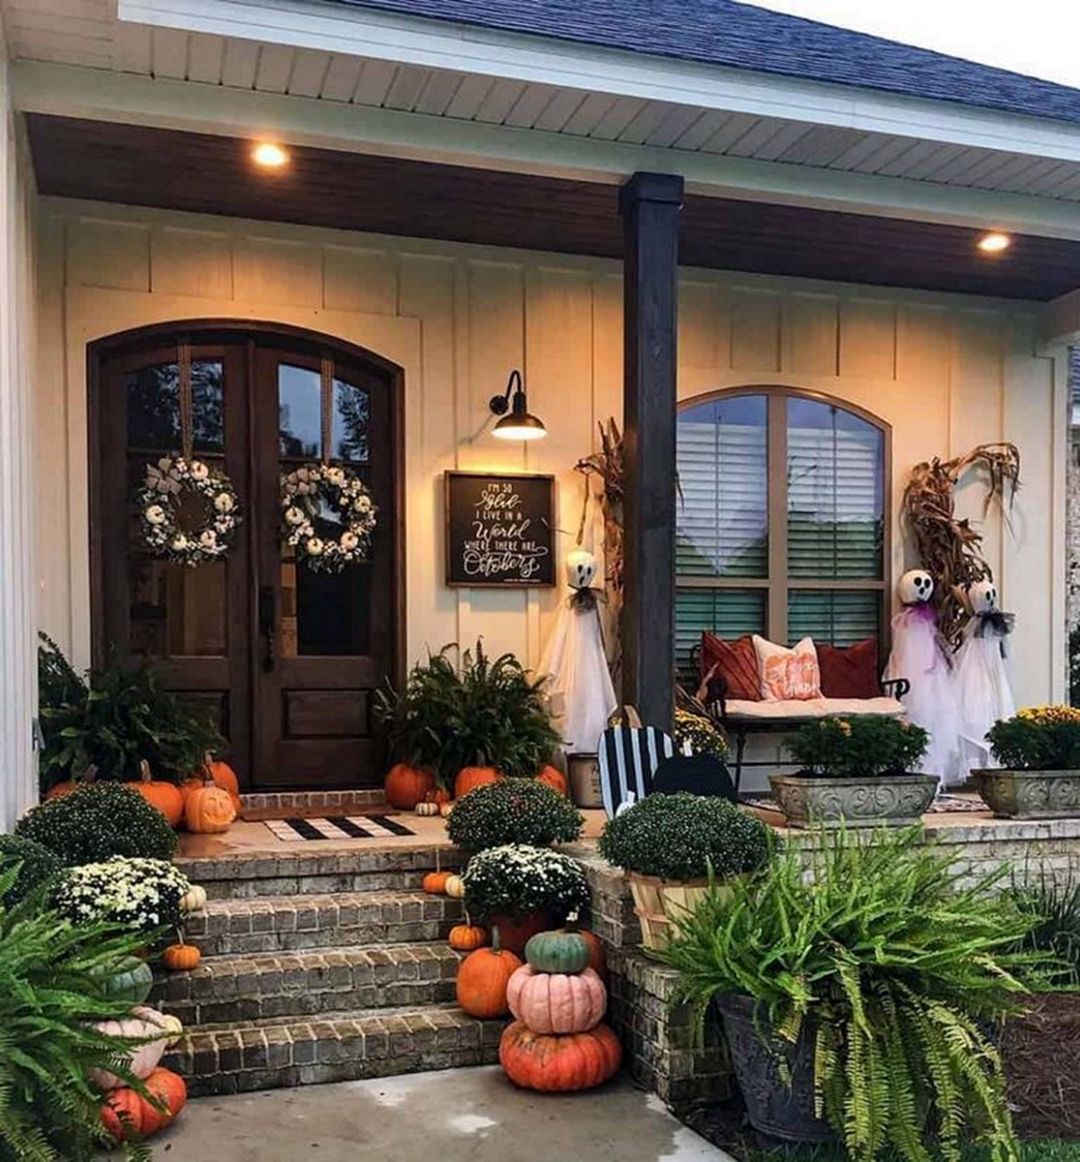 Dreamy ideas for decorating your front porch for fall